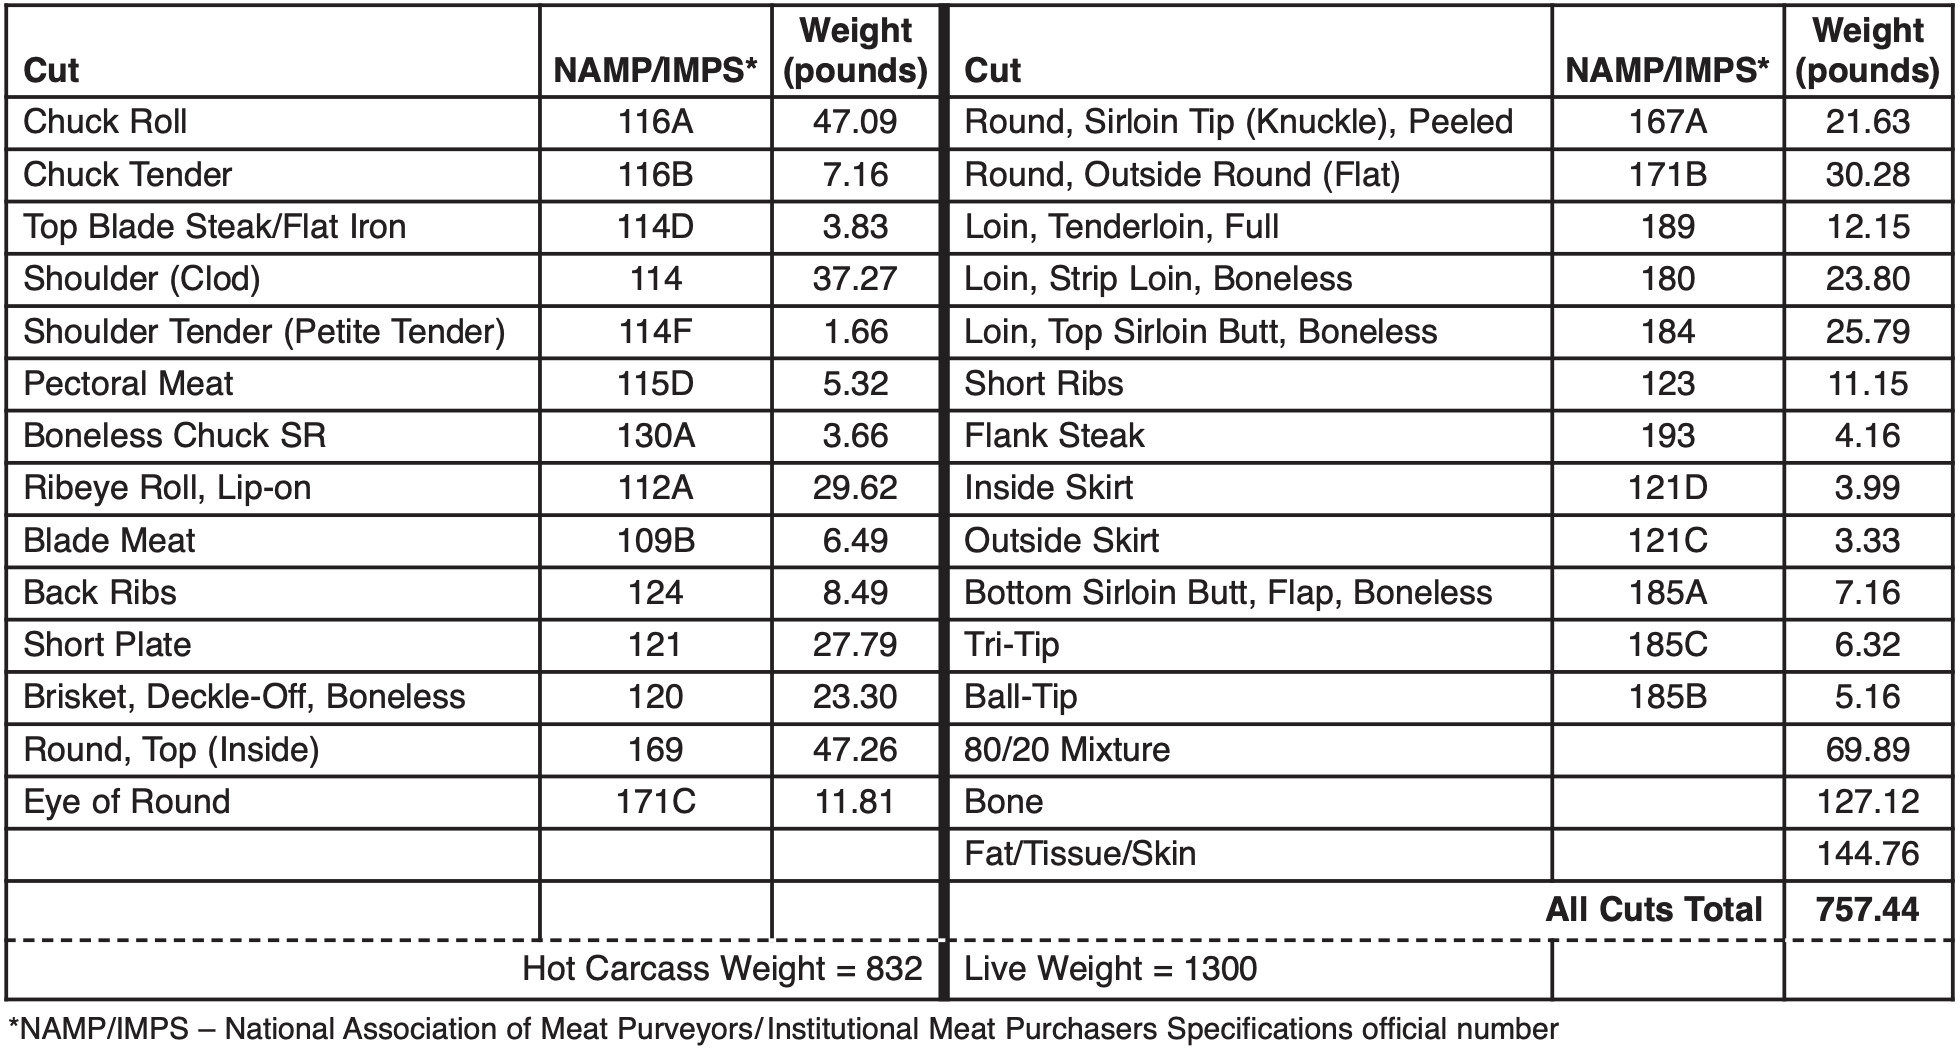  Beef Cutout Calculator Projected Cuts for a 1,300-Pound Live Weight, Choice,   USDA Yield Grade 3.00 to 3.25 Range.  